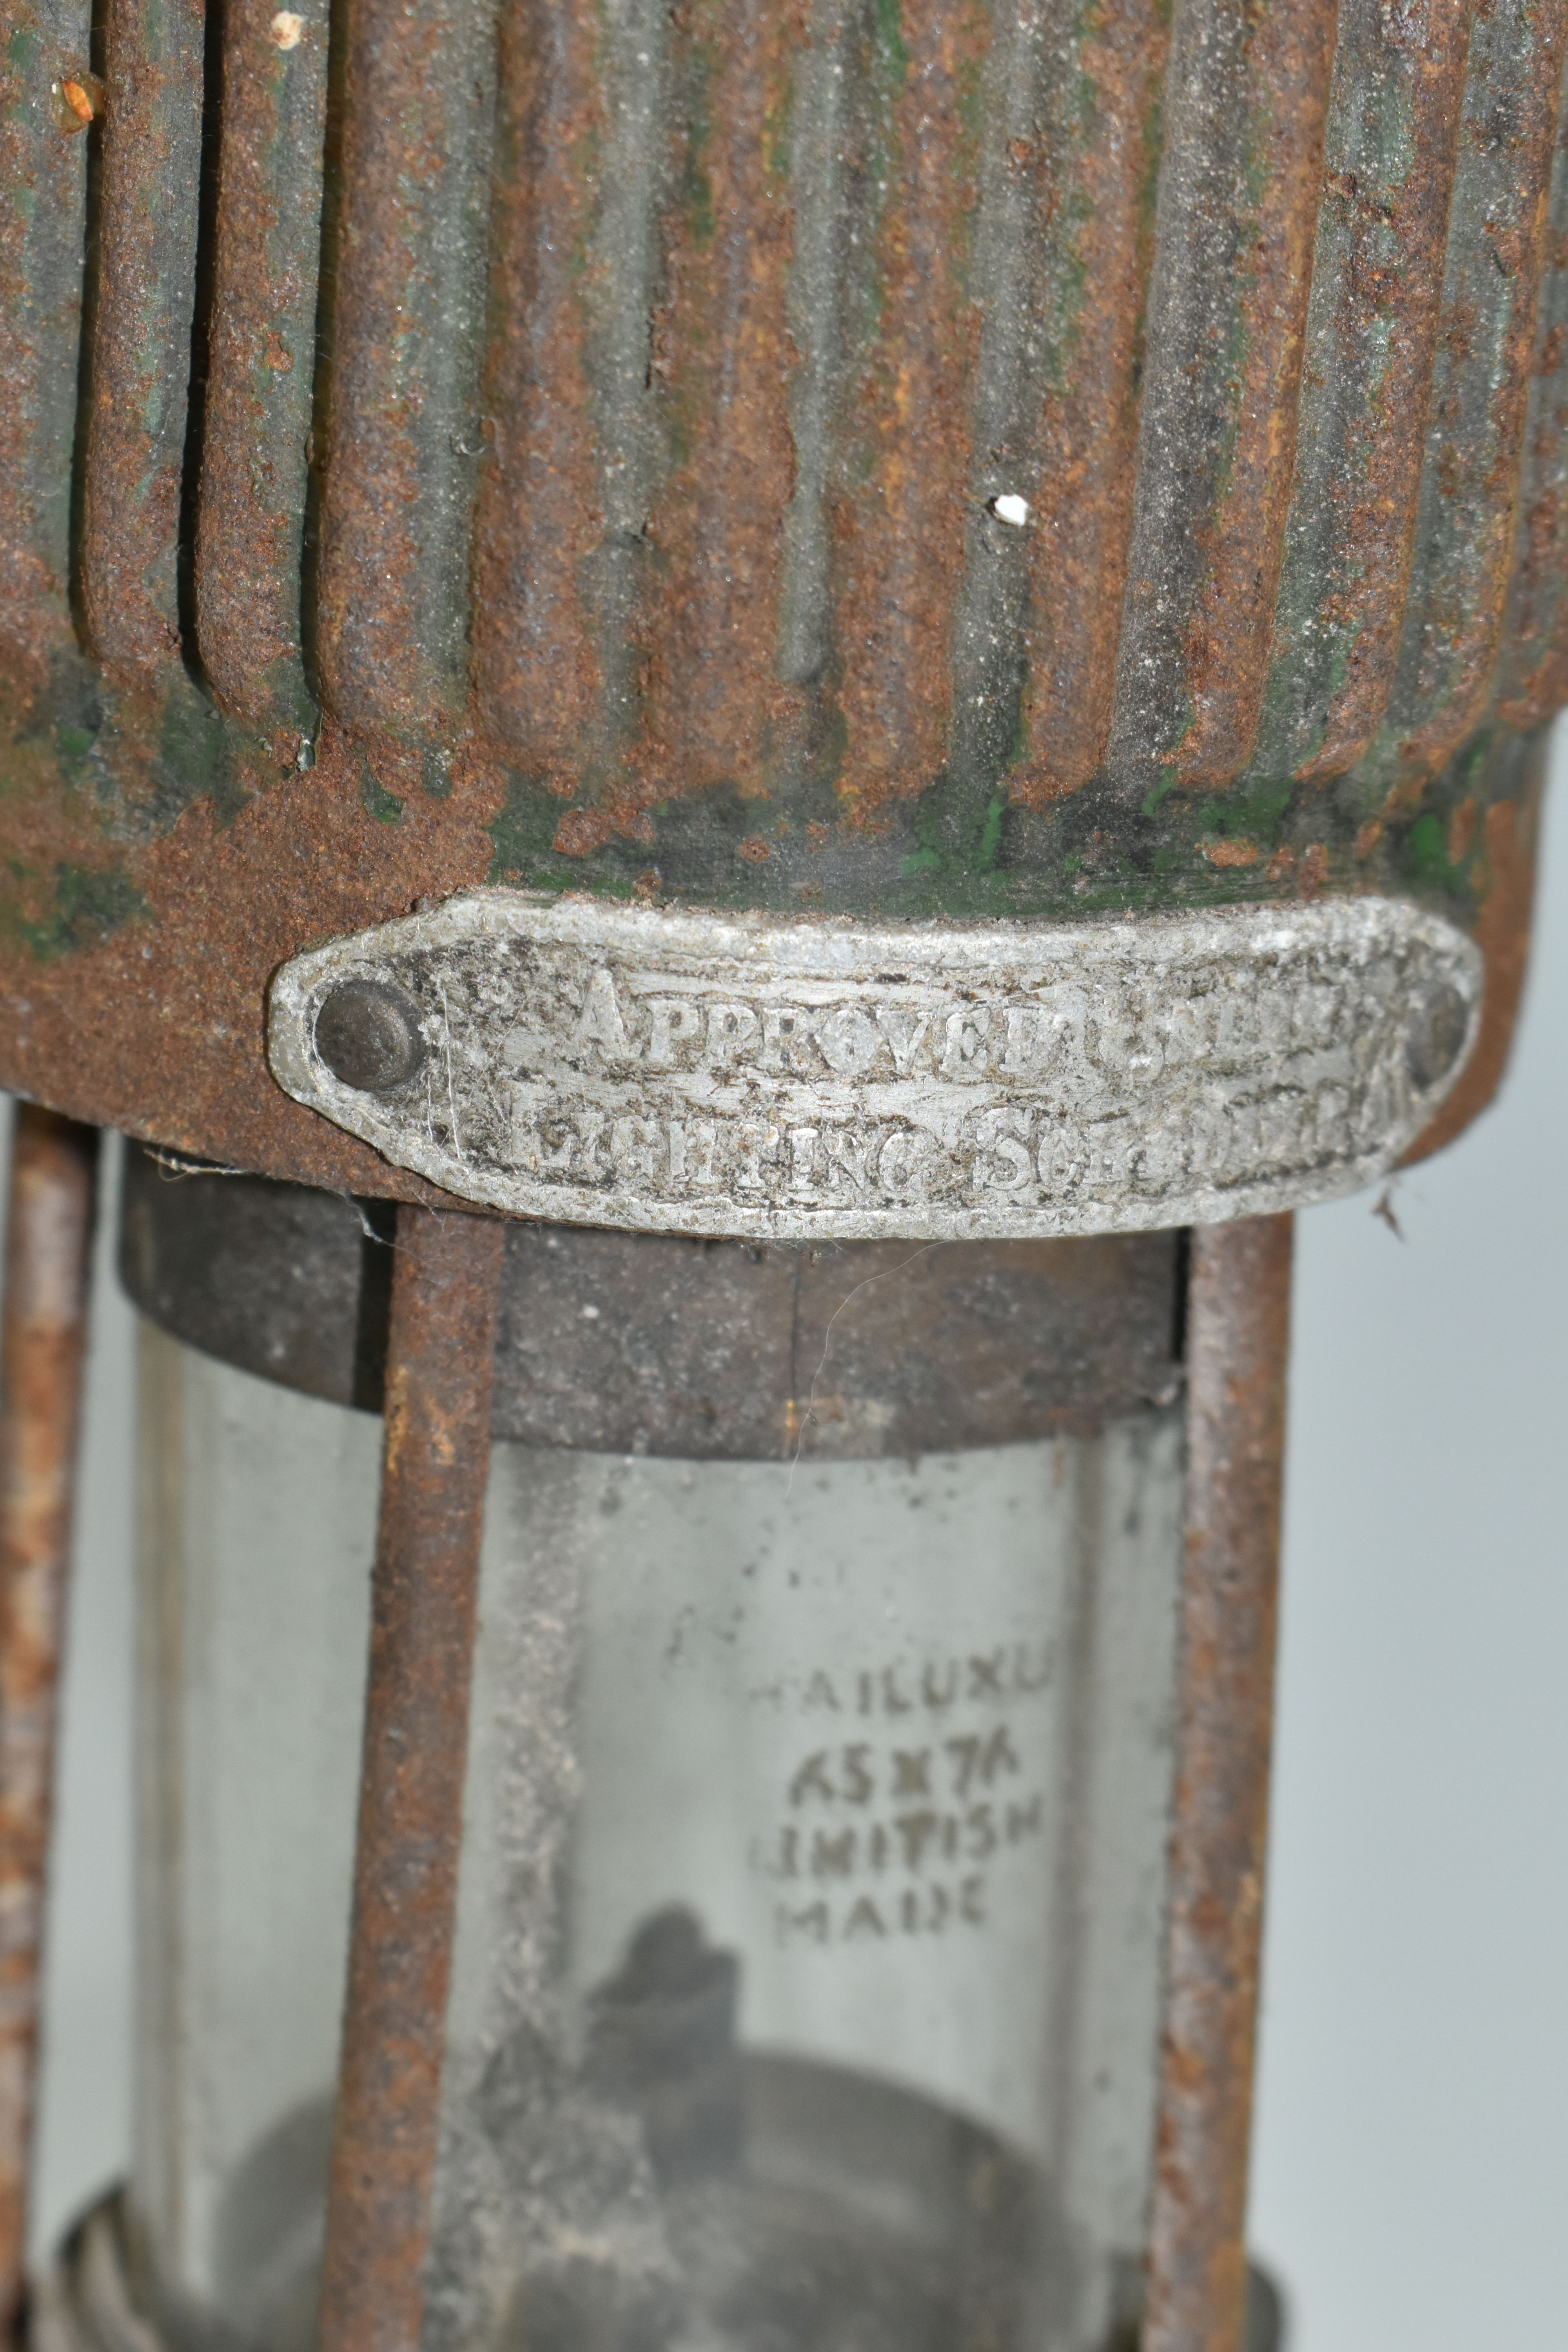 A VINTAGE PATTERSON TYPE MINER'S LAMP, in rusted condition, lettering to top indistinct, bears - Image 2 of 4